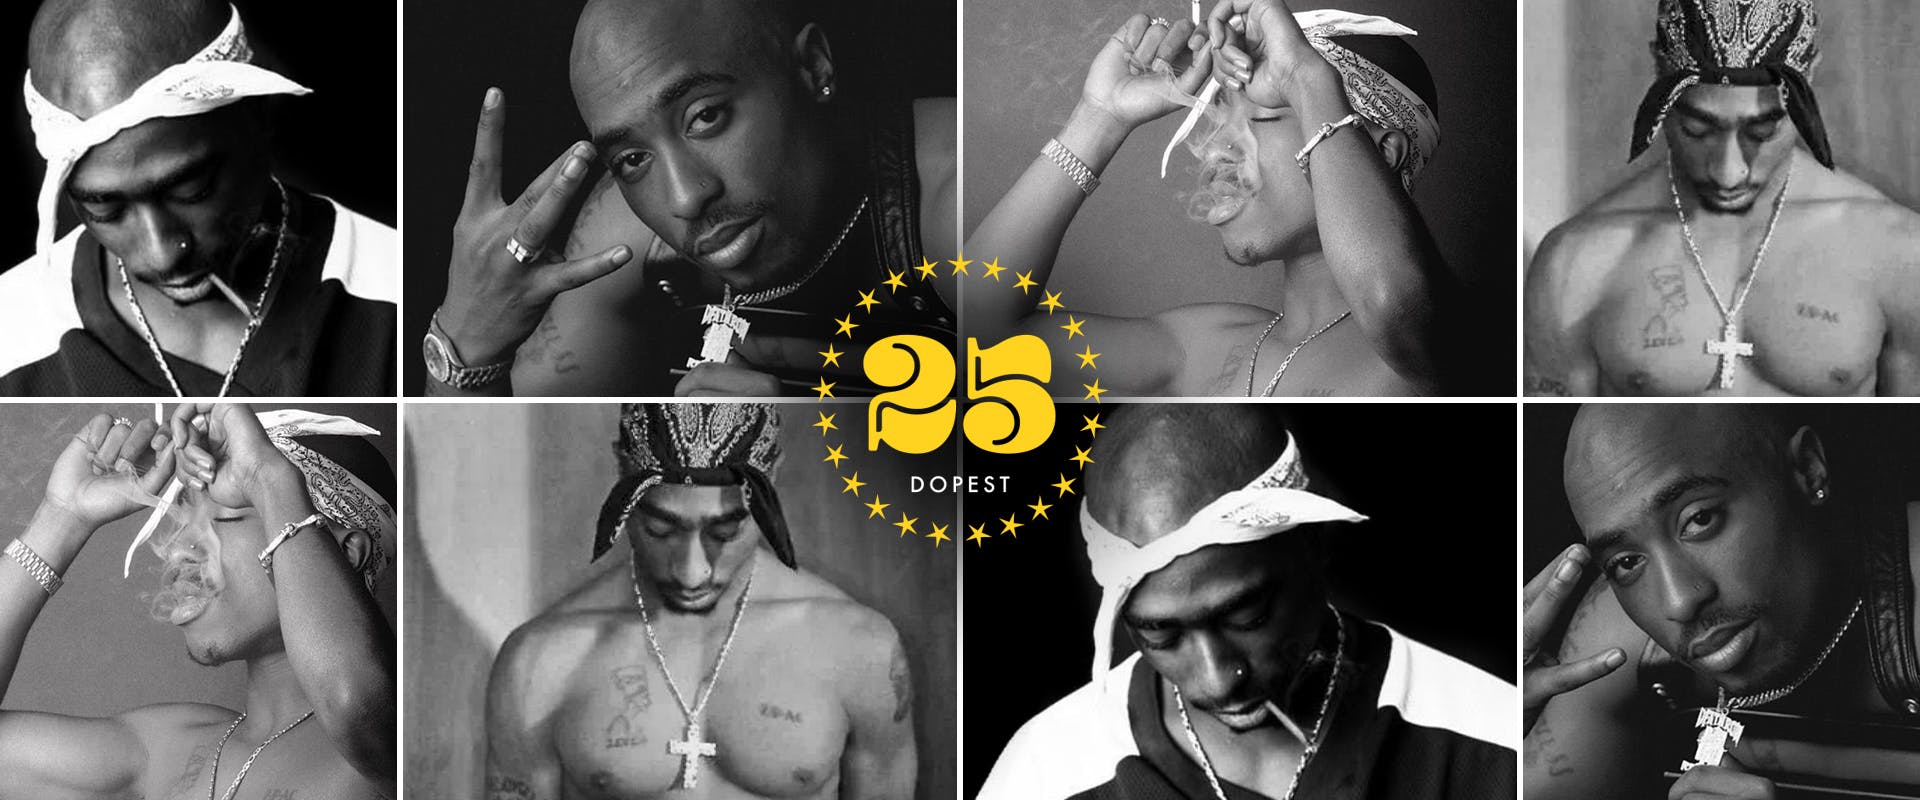 2pac brothers and sisters